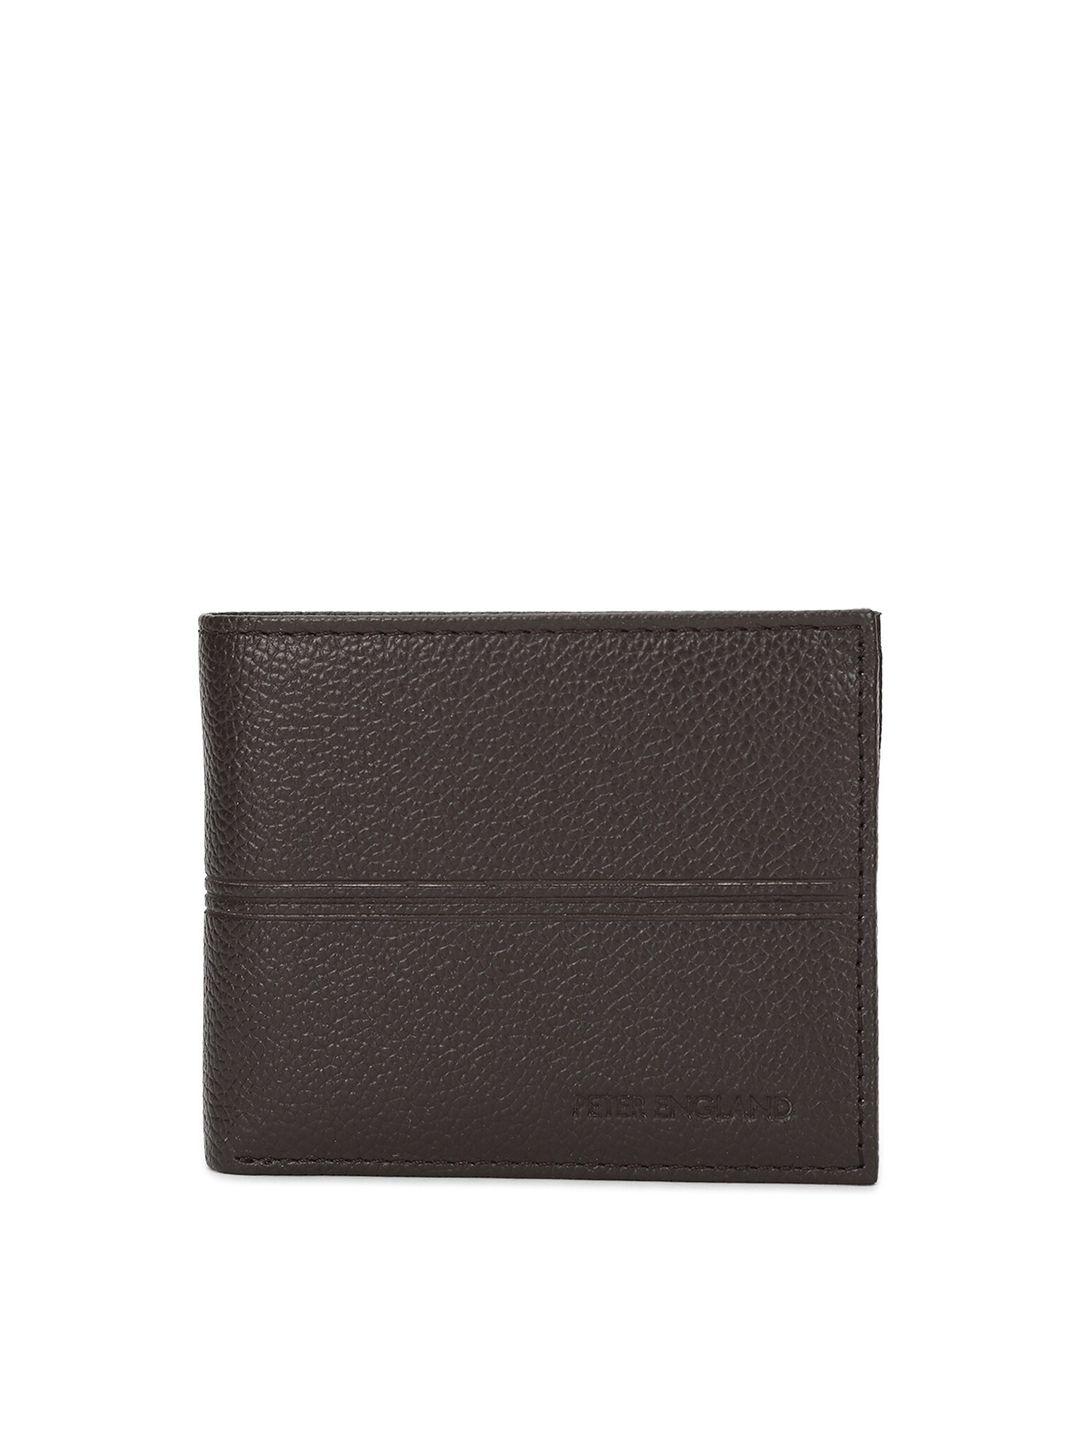 peter england men brown textured leather two fold wallet